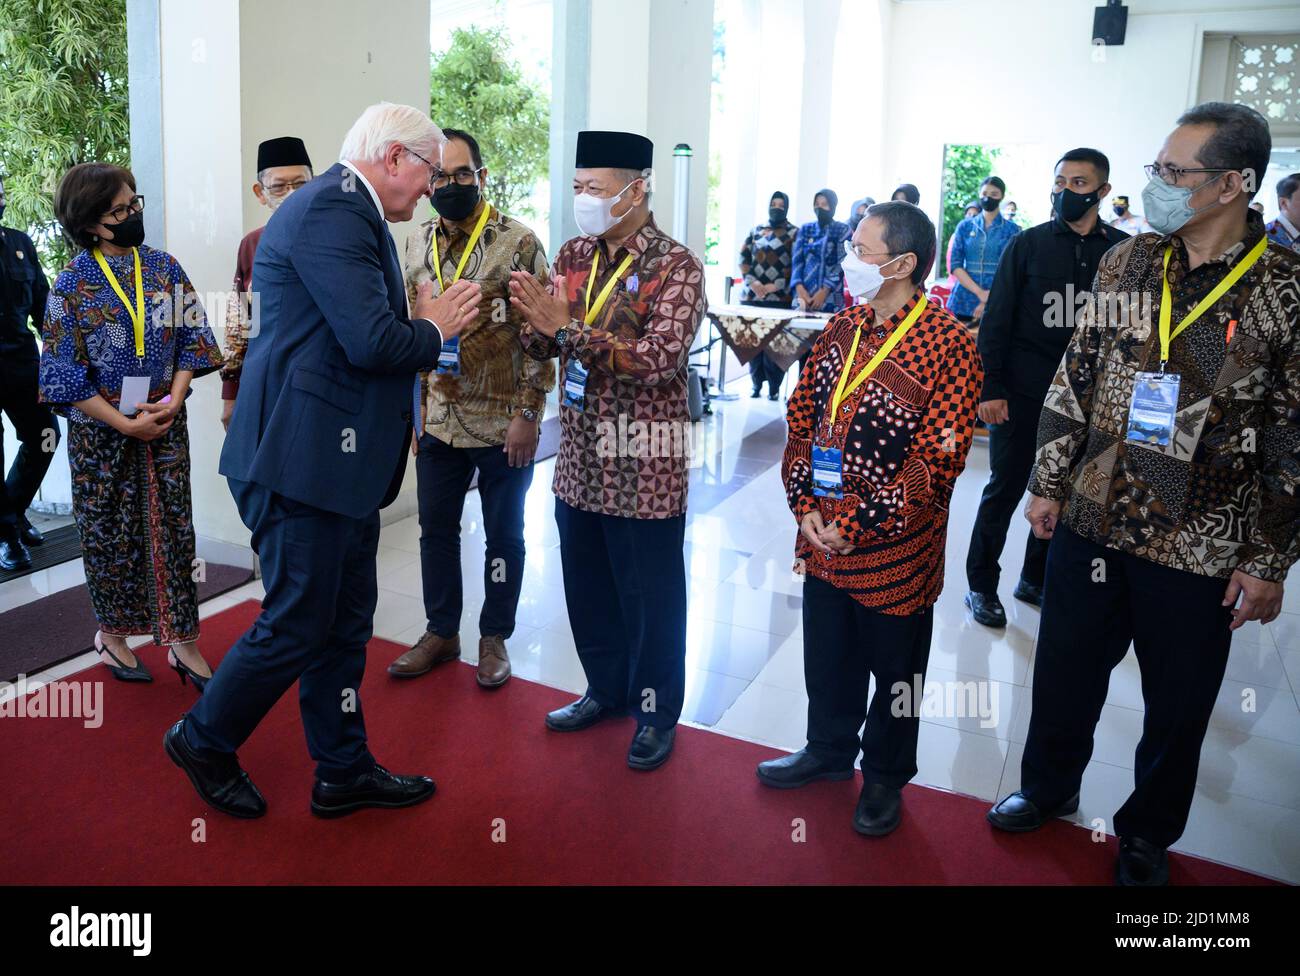 17 June 2022, Indonesia, Yogyakarta: German President Frank-Walter Steinmeier (2nd from left) is welcomed at Gadjah Mada University. President Steinmeier is on a two-day visit to Indonesia. He was previously in Singapore for two days. Photo: Bernd von Jutrczenka/dpa Stock Photo